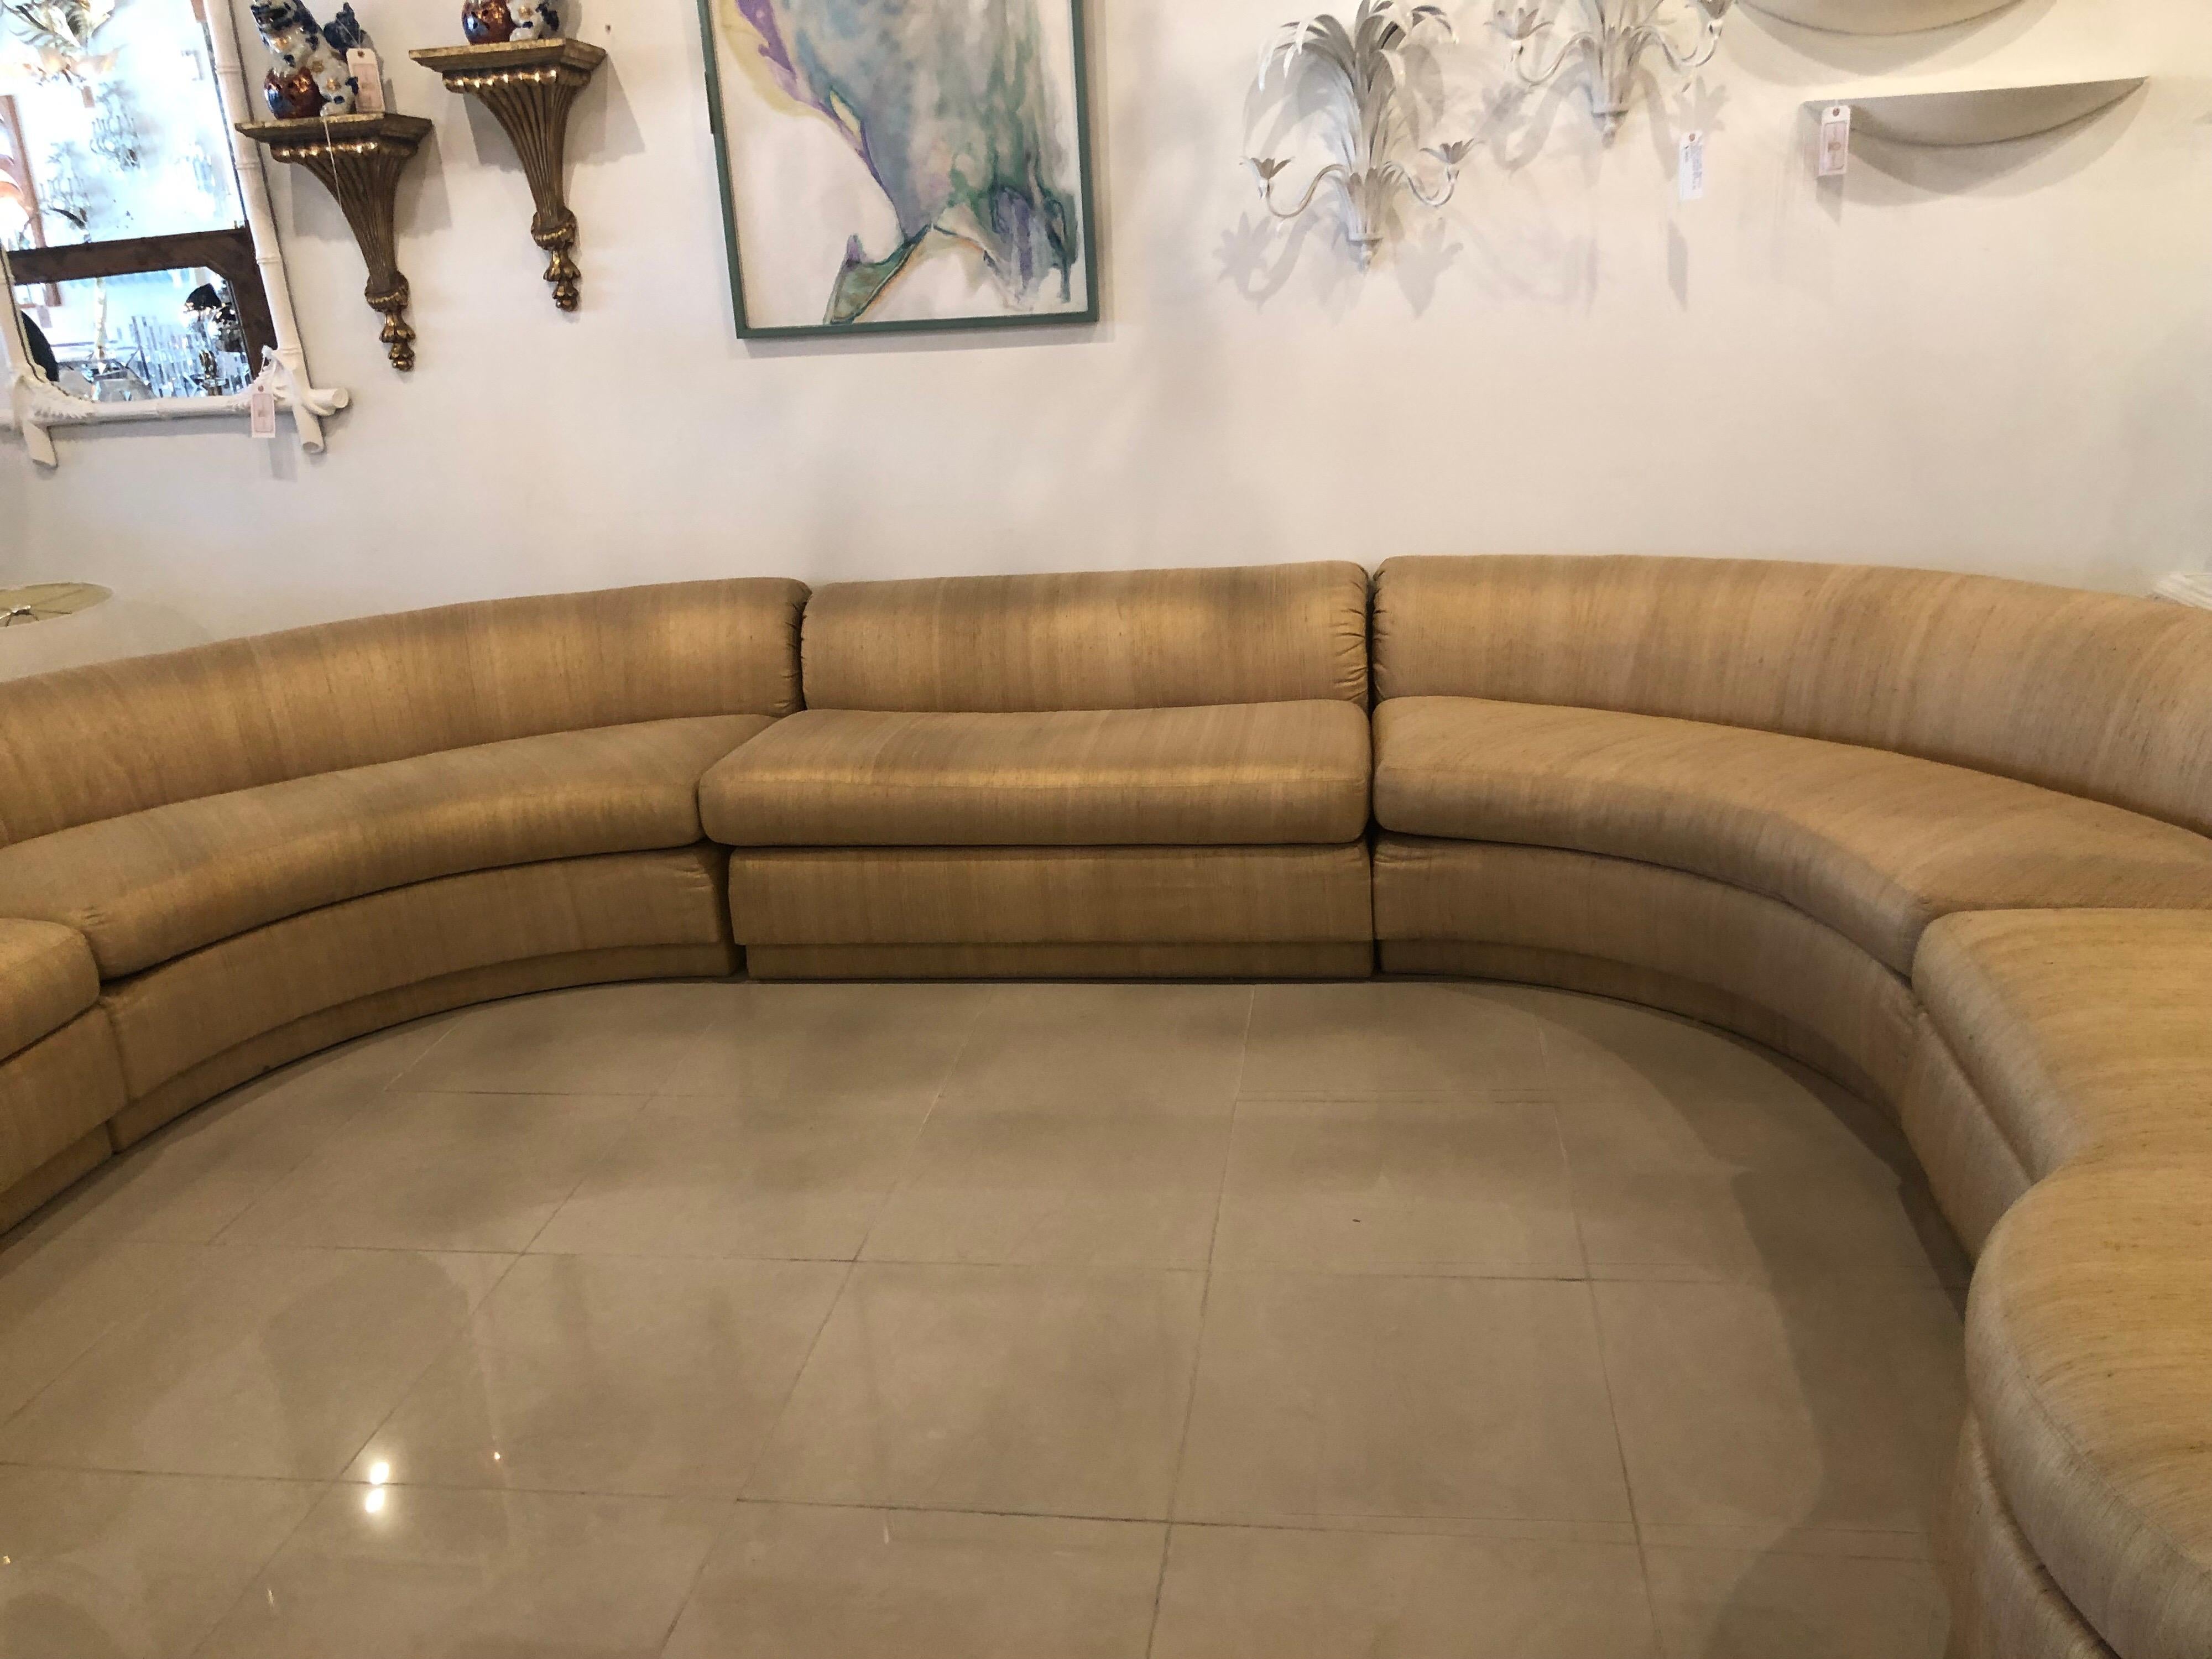 Vintage Mid-Century Modern curved circular, serpentine 5-piece sectional sofa in the style of Milo Baughman. This incredible 1970s sofa can be set up in a number of ways. Each way gives the sectional a complete different look. I have it pictured in